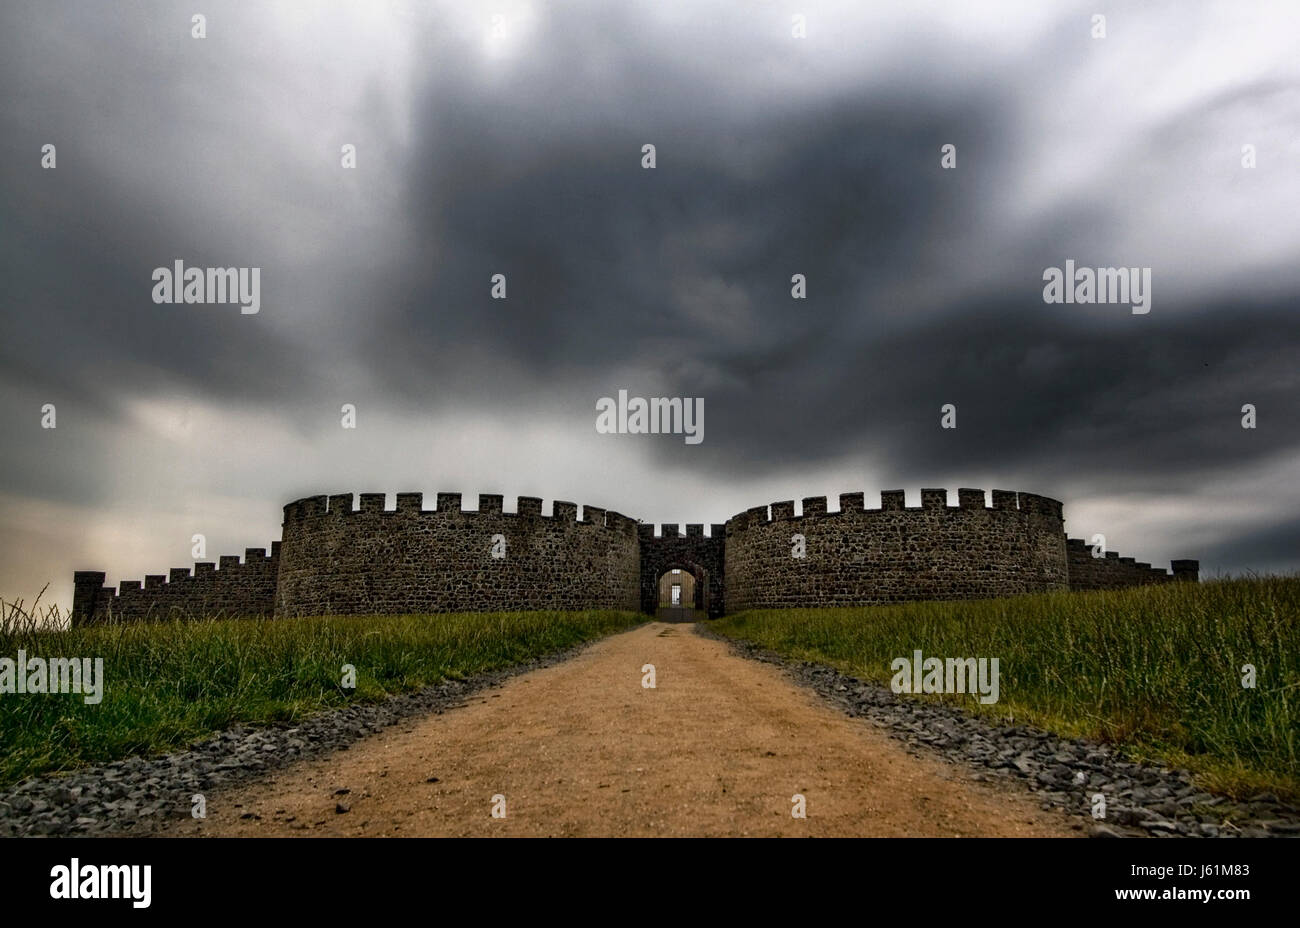 ireland north palace path way clouds chateau castle historical hill sightseeing Stock Photo